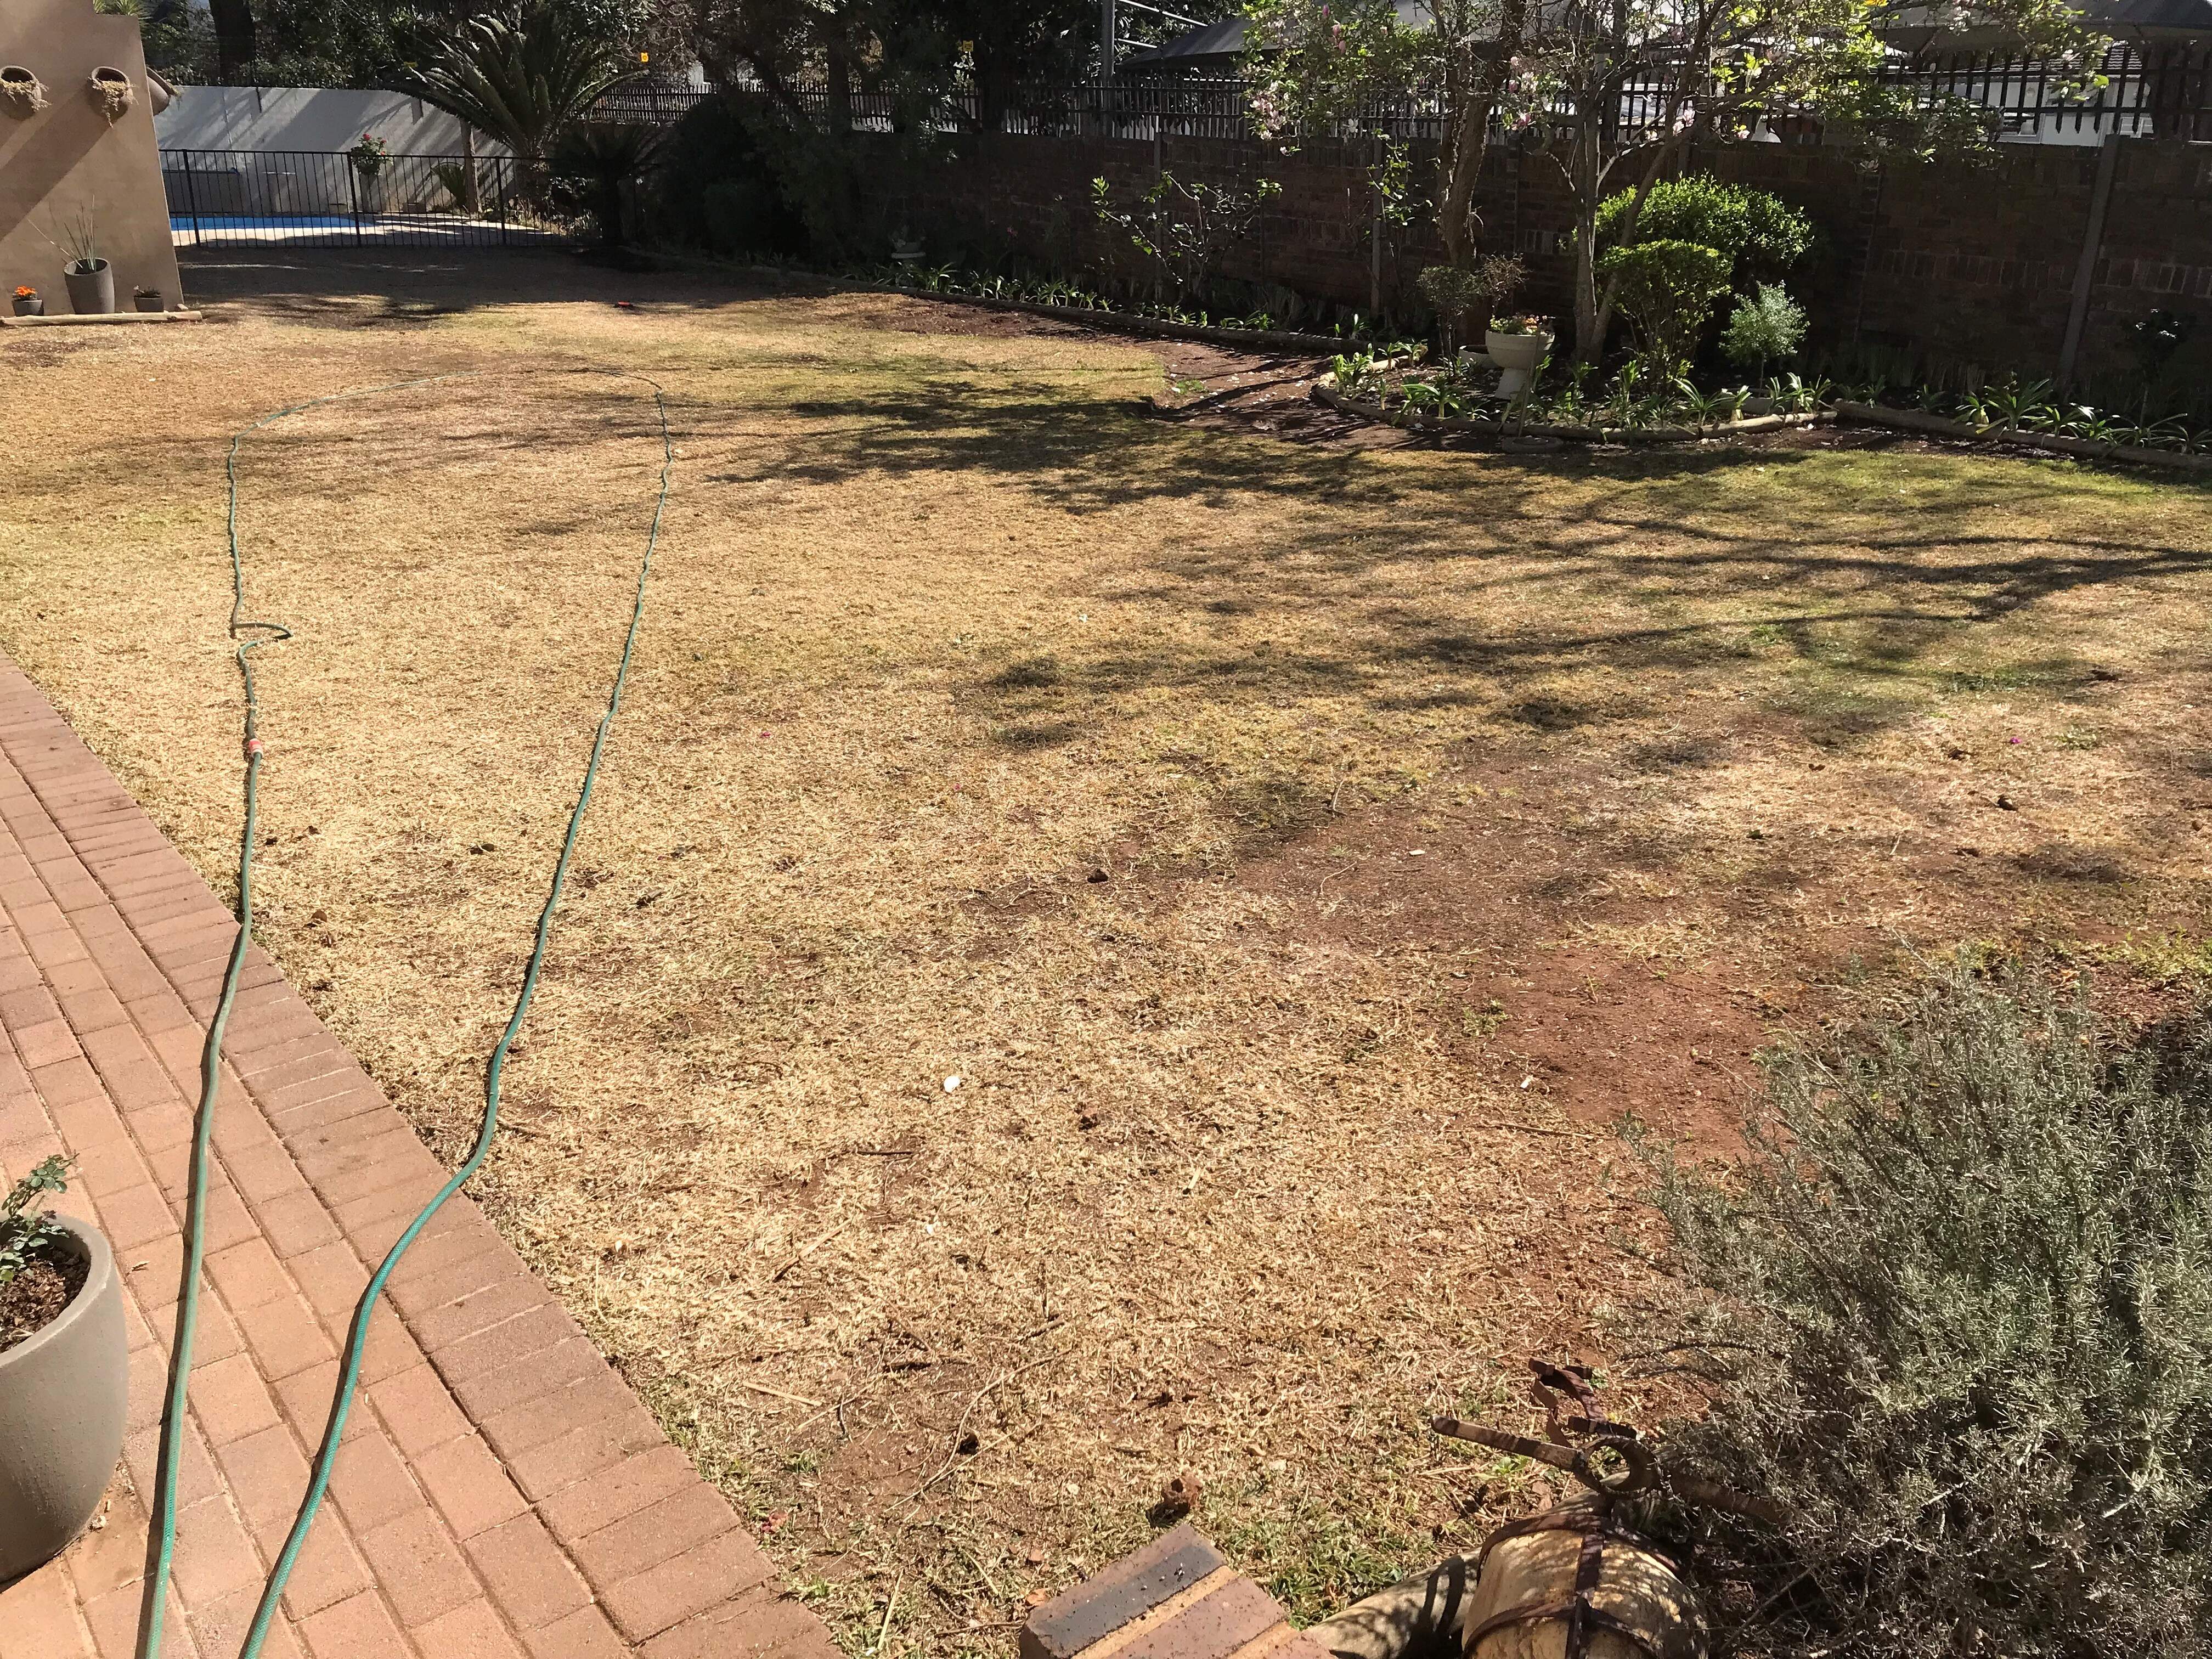 Help! I have an ugly lawn and I really want to fix it.